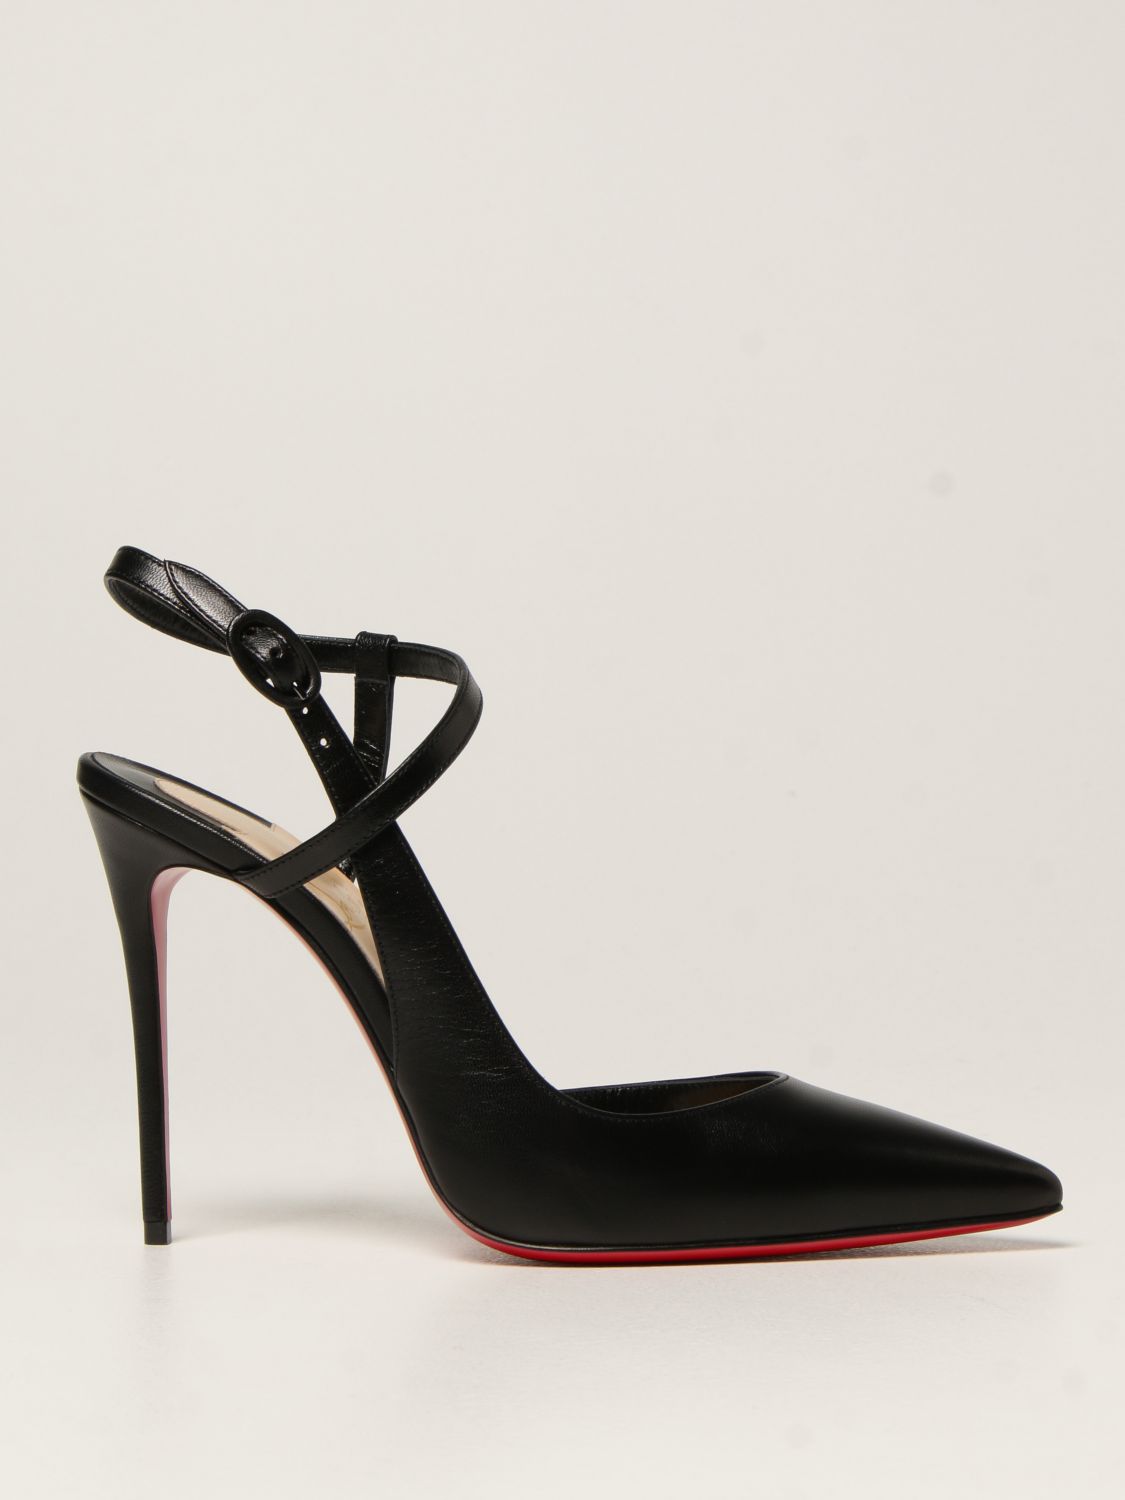 Chaussures femme Christian Louboutin